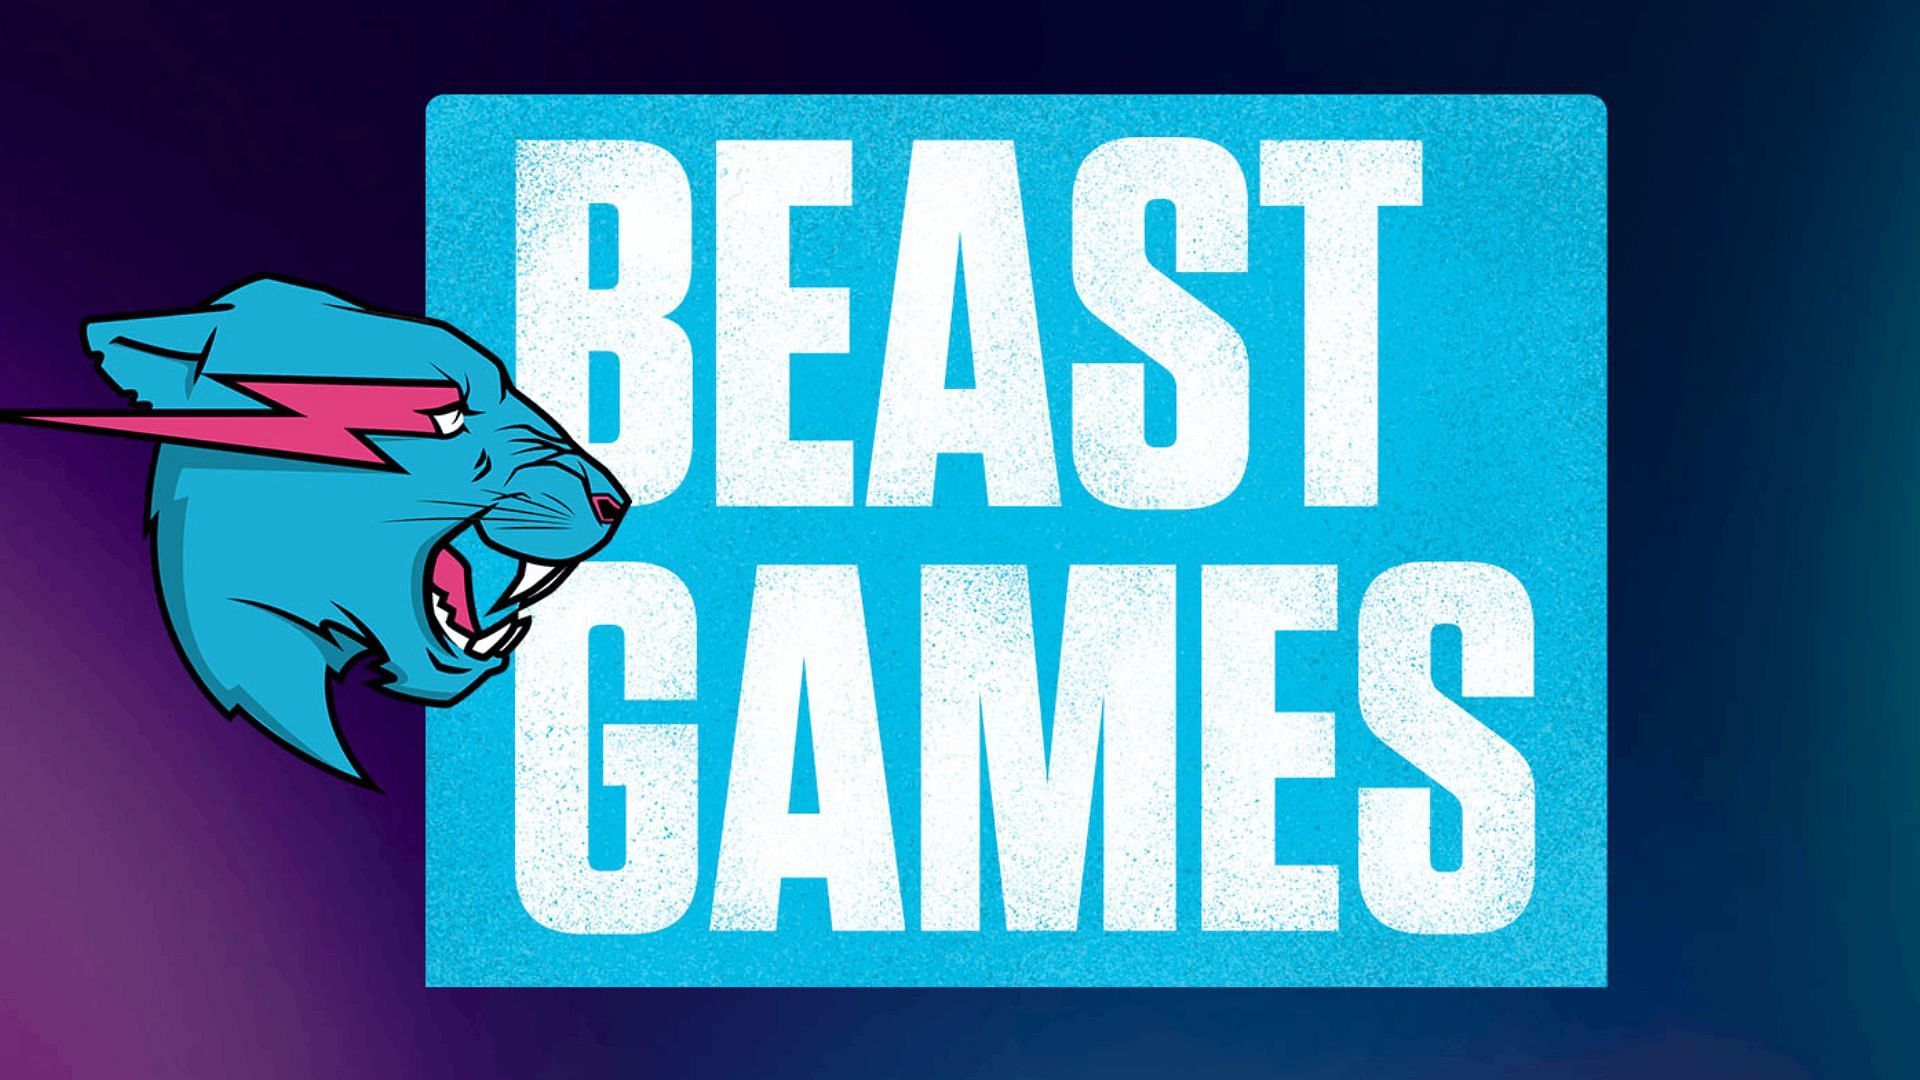 How to apply for a chance to participate in BeastGames? (Image via beastgames.com)